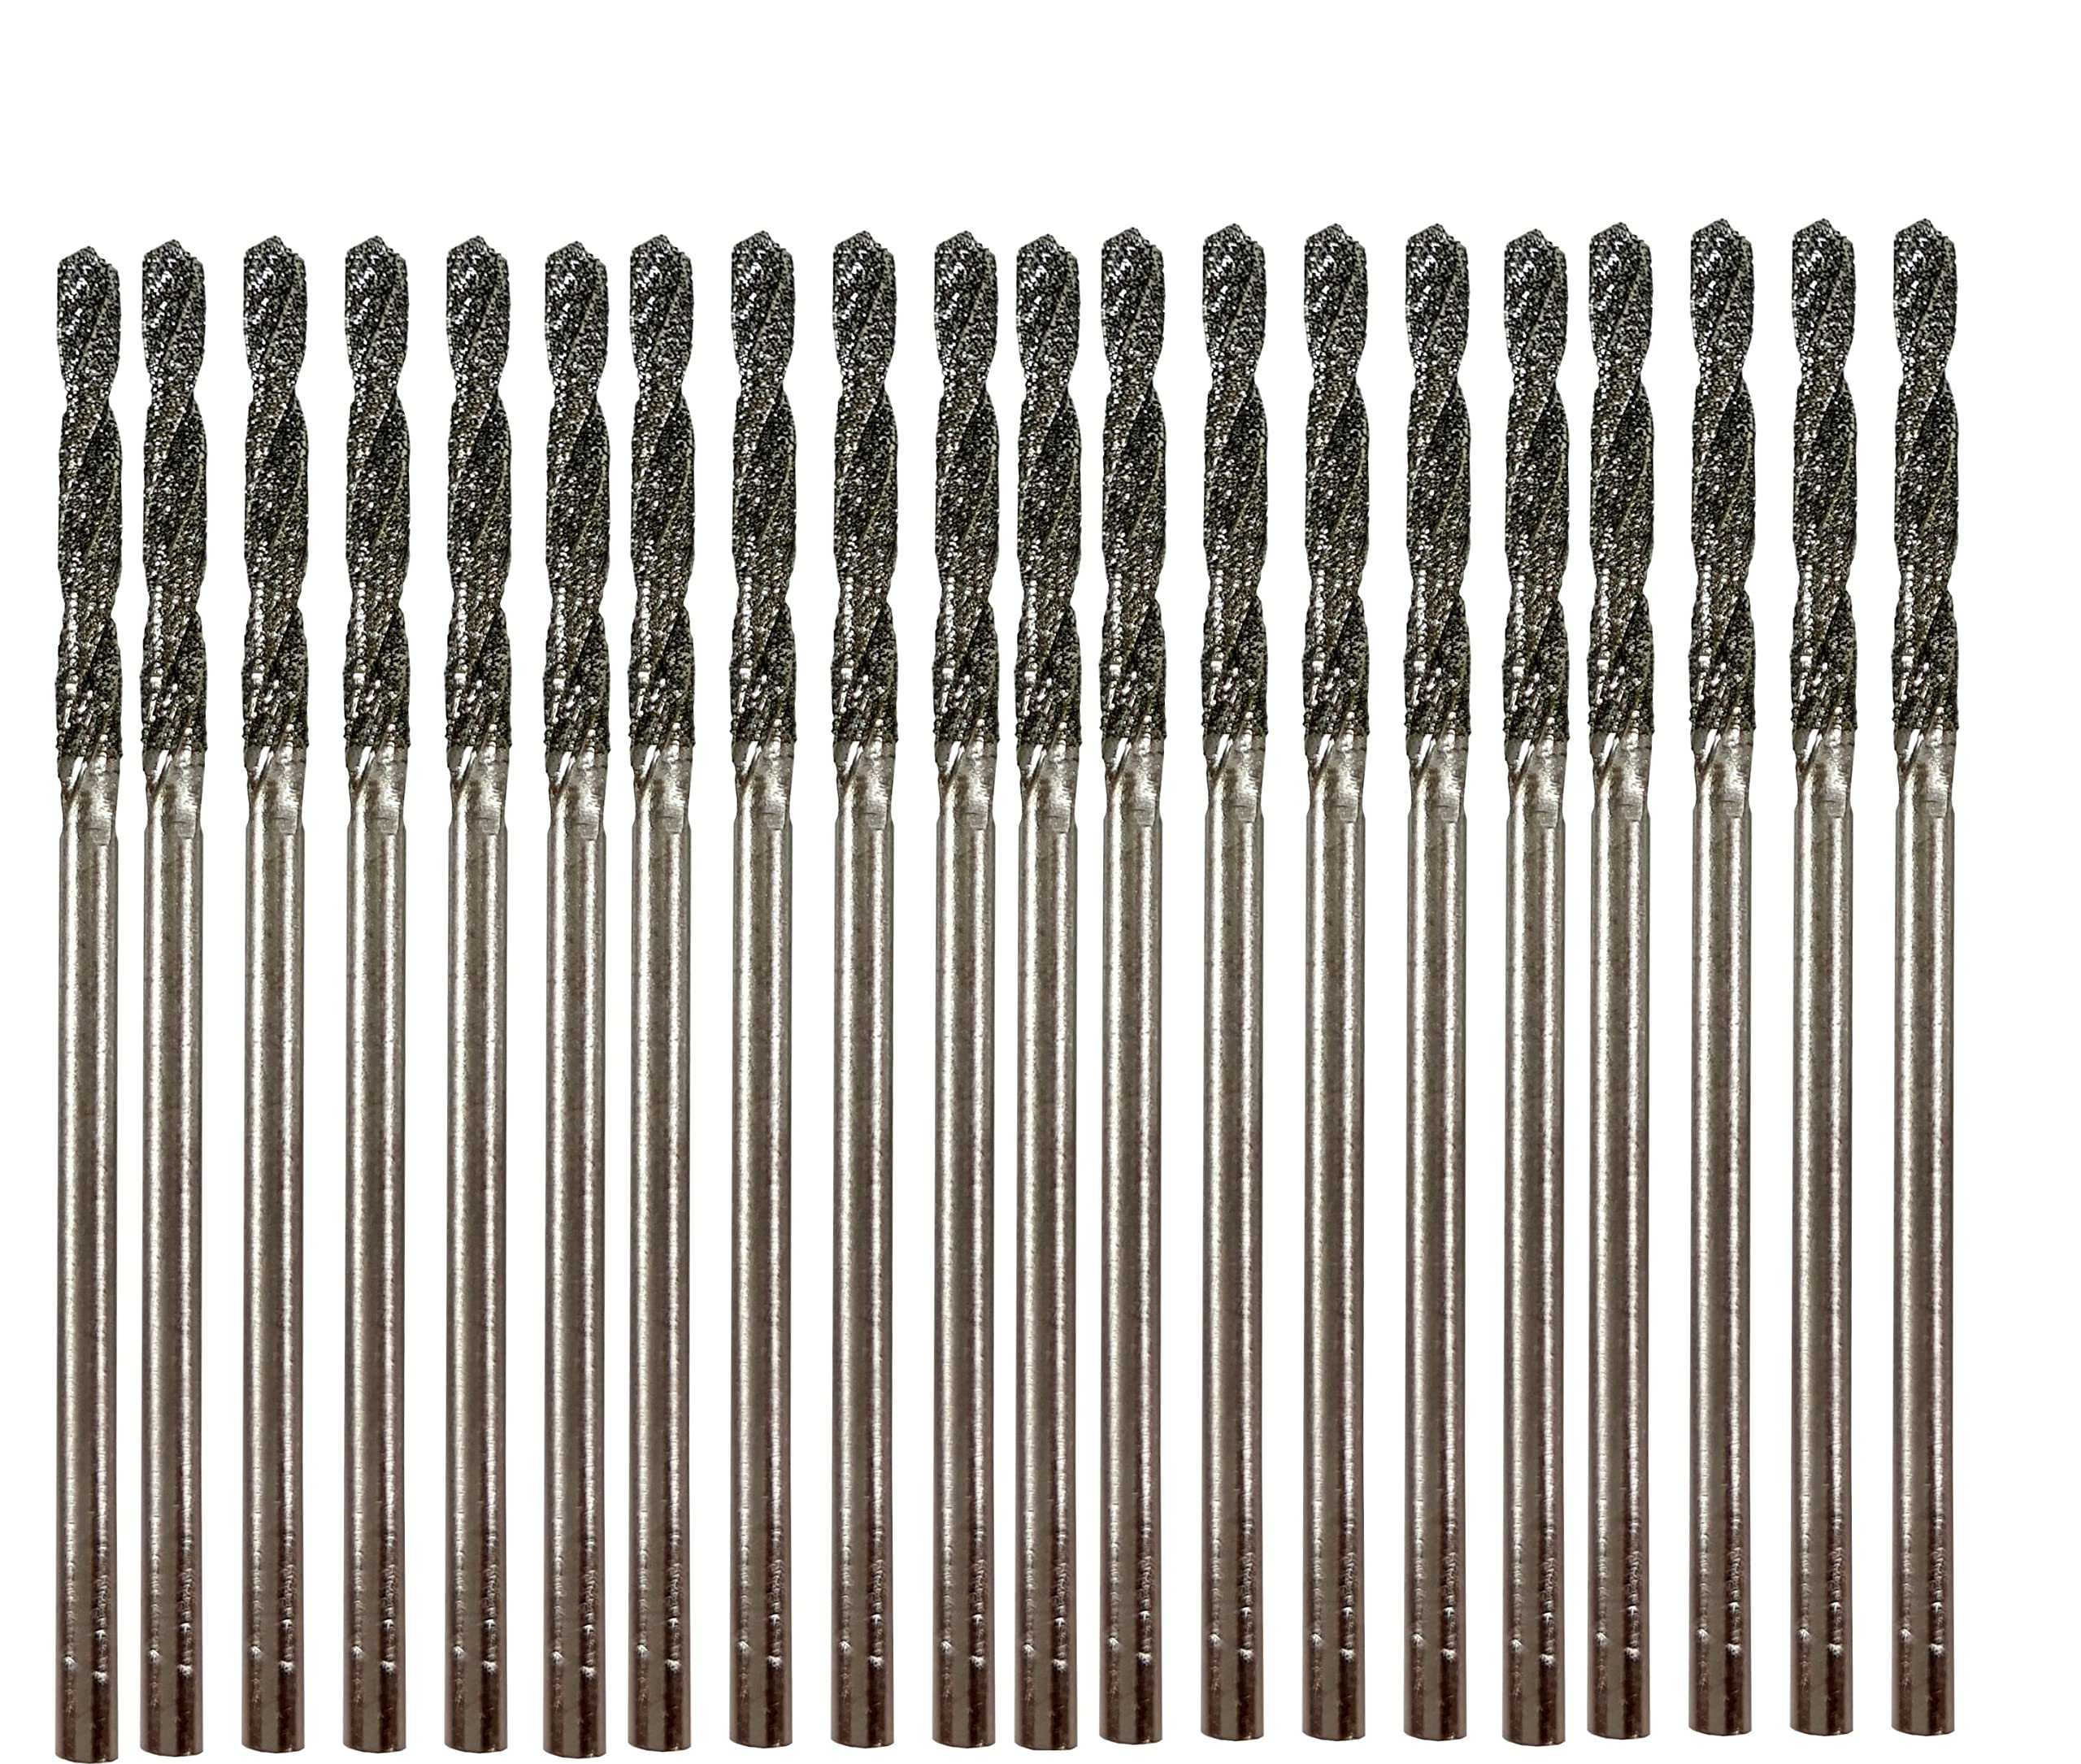 Diamond Drill Bit Set 2mm 20 Pieces Compatible with Dremel Collet Included Twist Tip Jewelry Beach Sea Glass Shells Gemstones Lapidary Ornament Bracelet Necklace Arts Crafts 5/64 inch